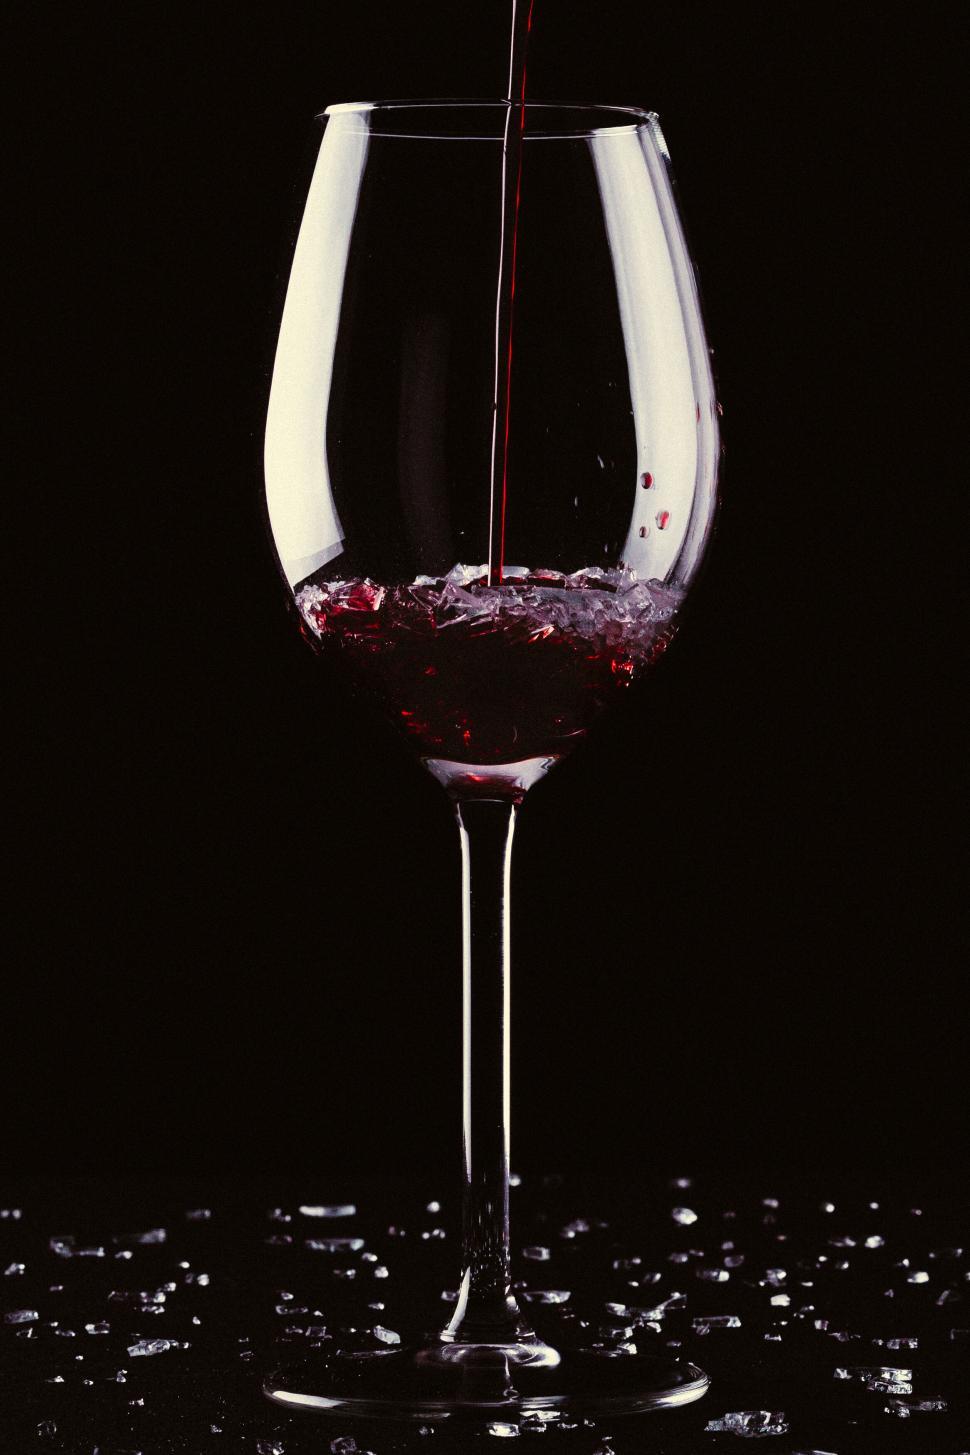 Free Image of Red wine pouring into glass at dark 